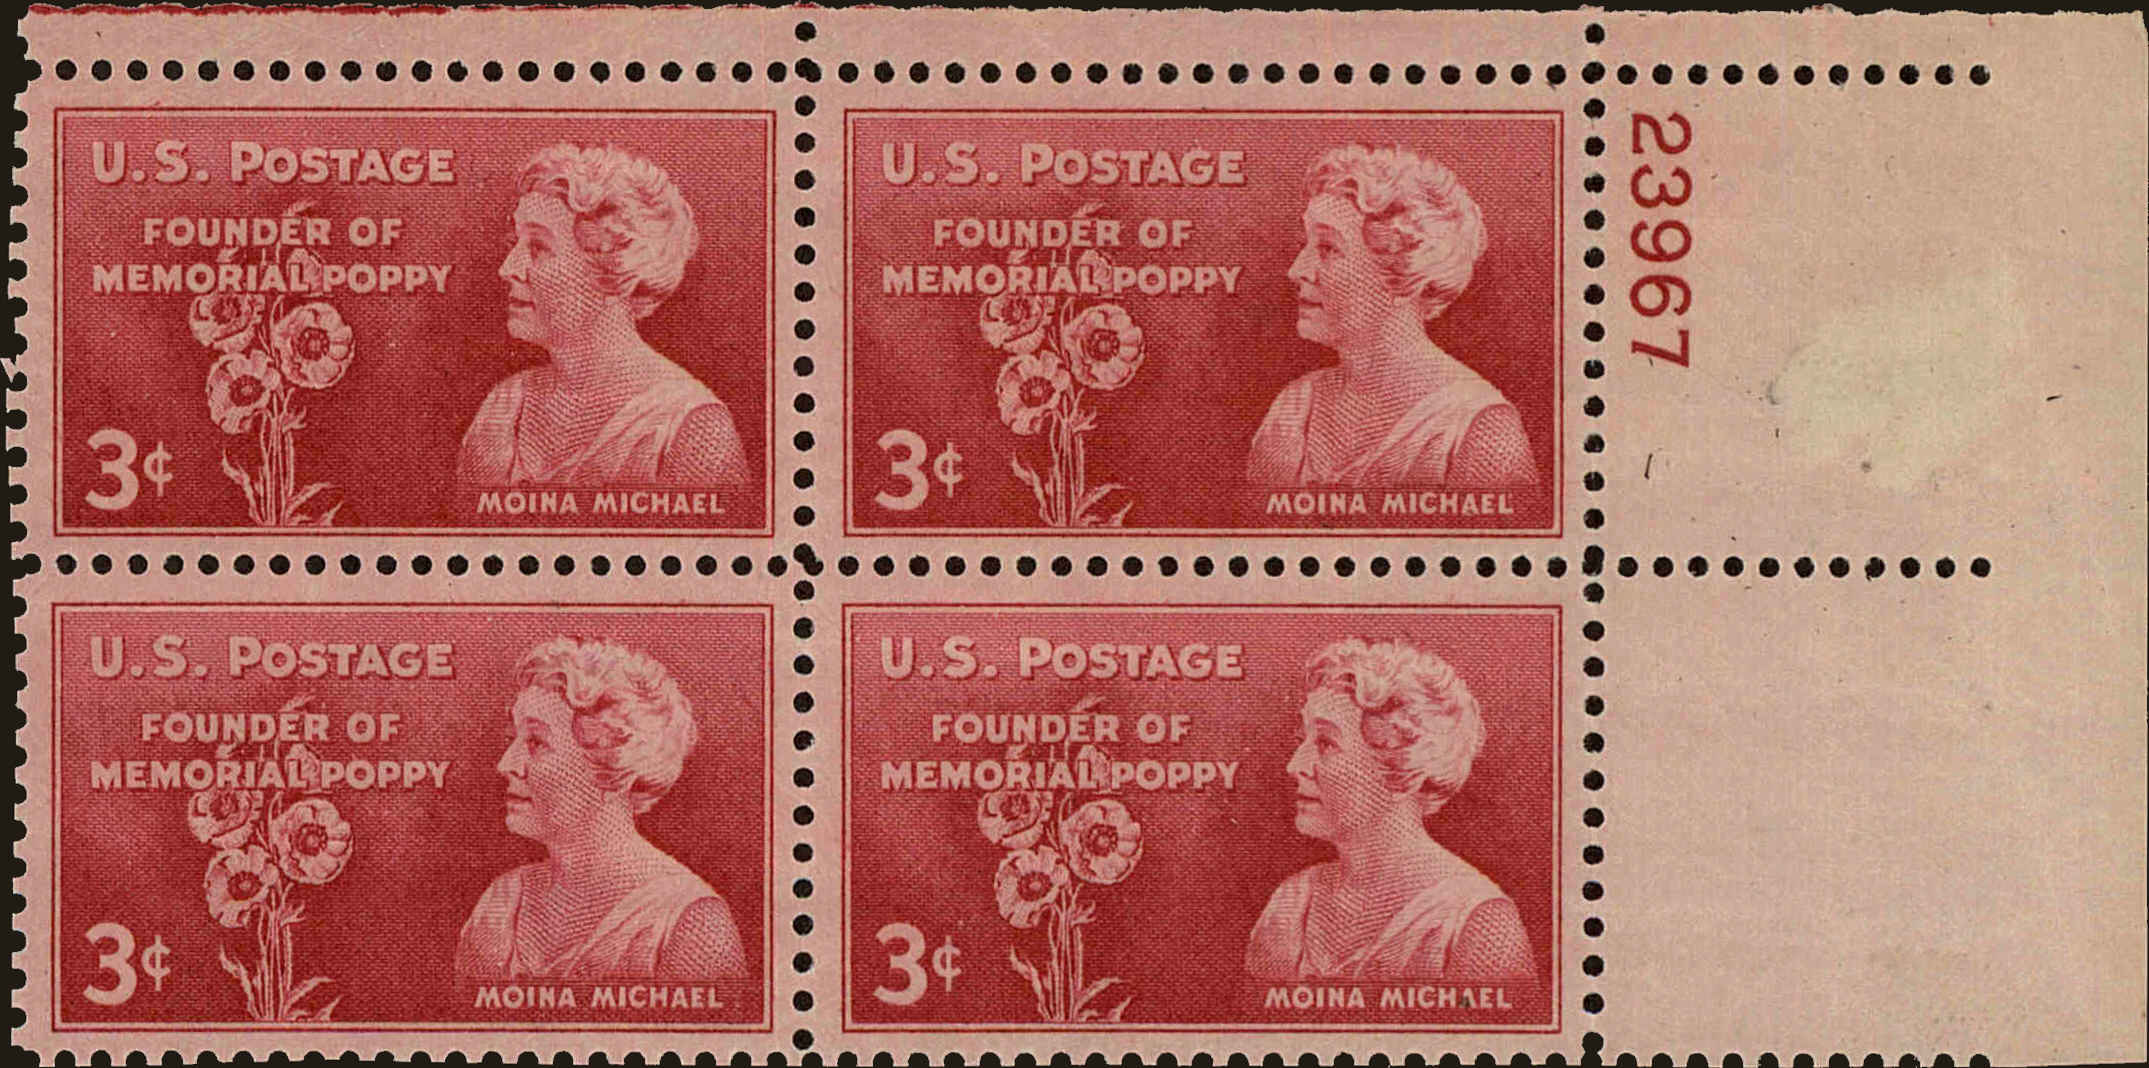 Front view of United States 977 collectors stamp